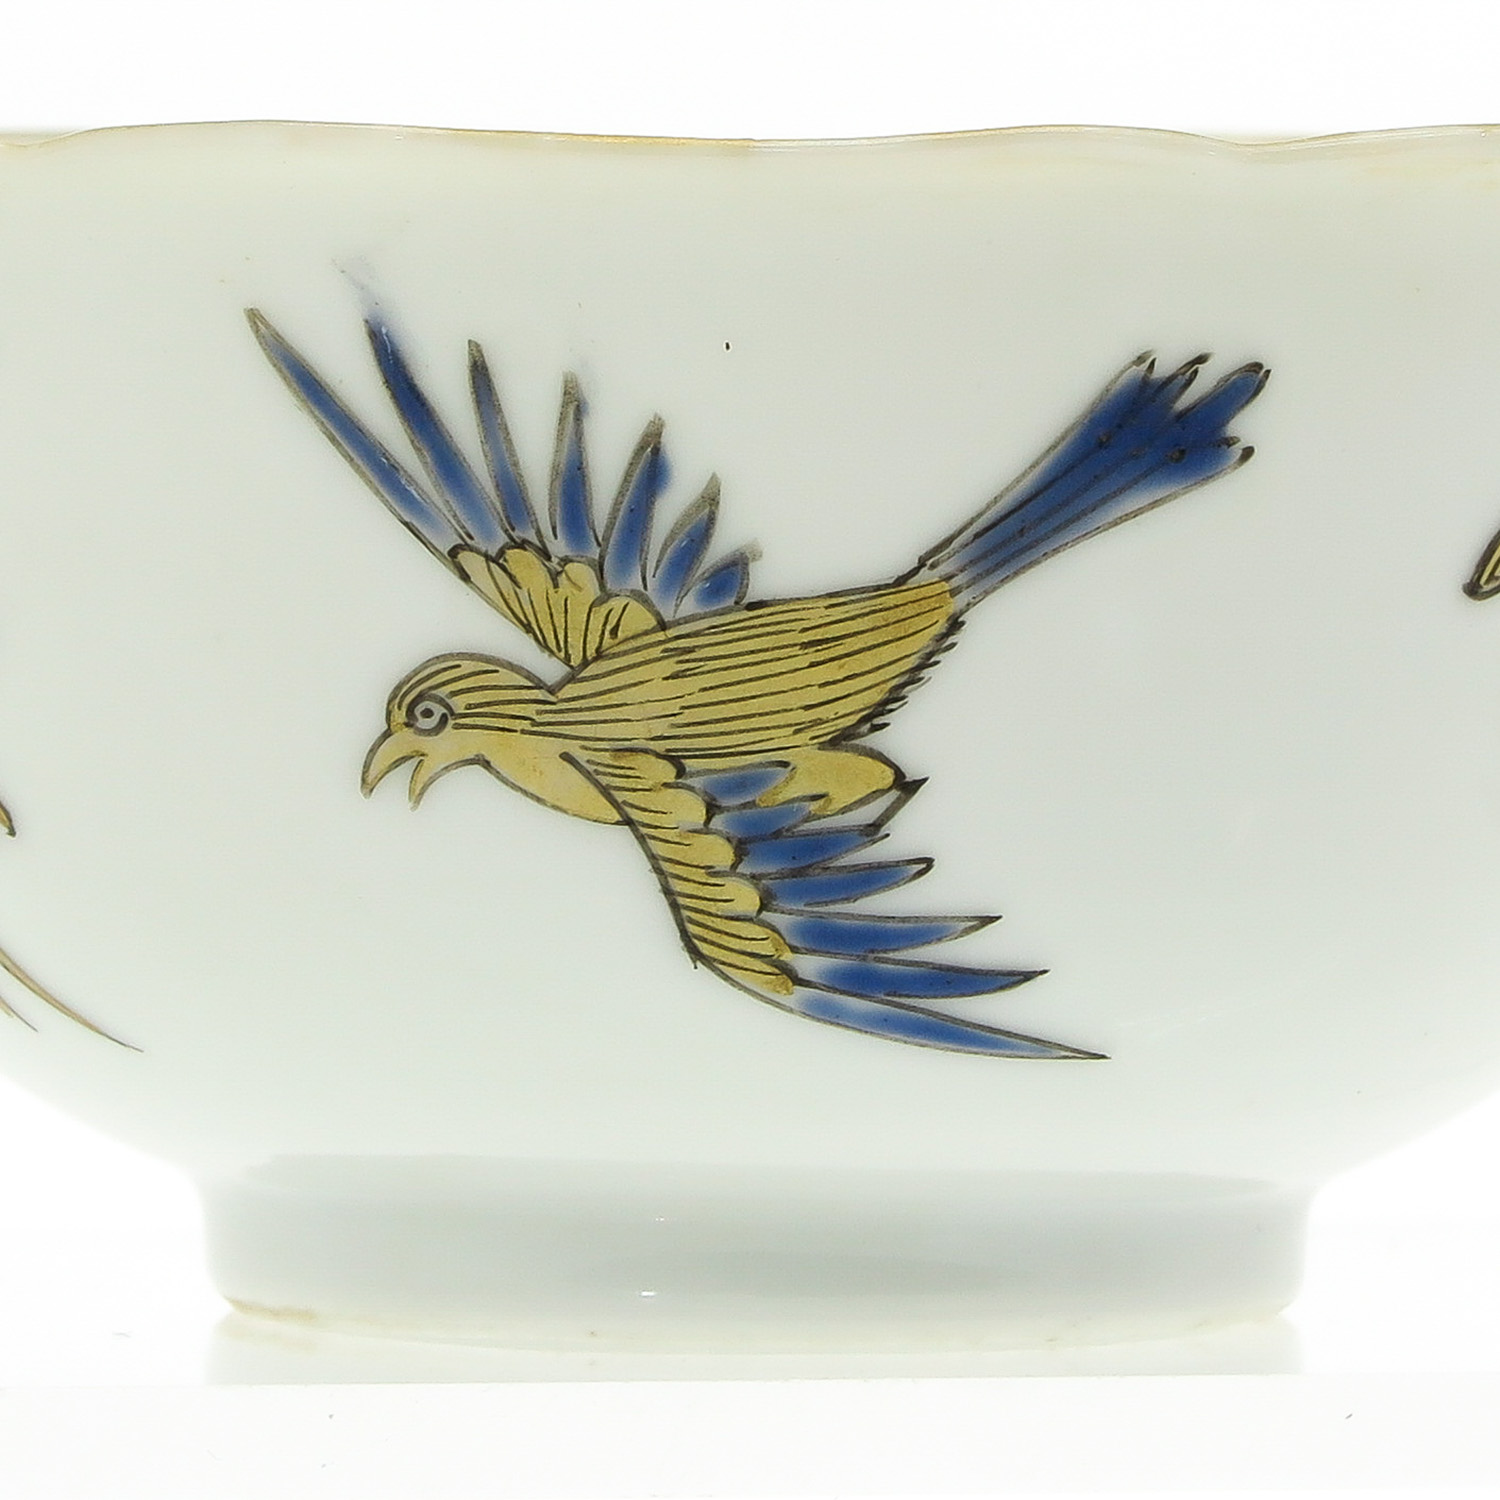 A Series of 4 Cups and Saucers - Image 8 of 10